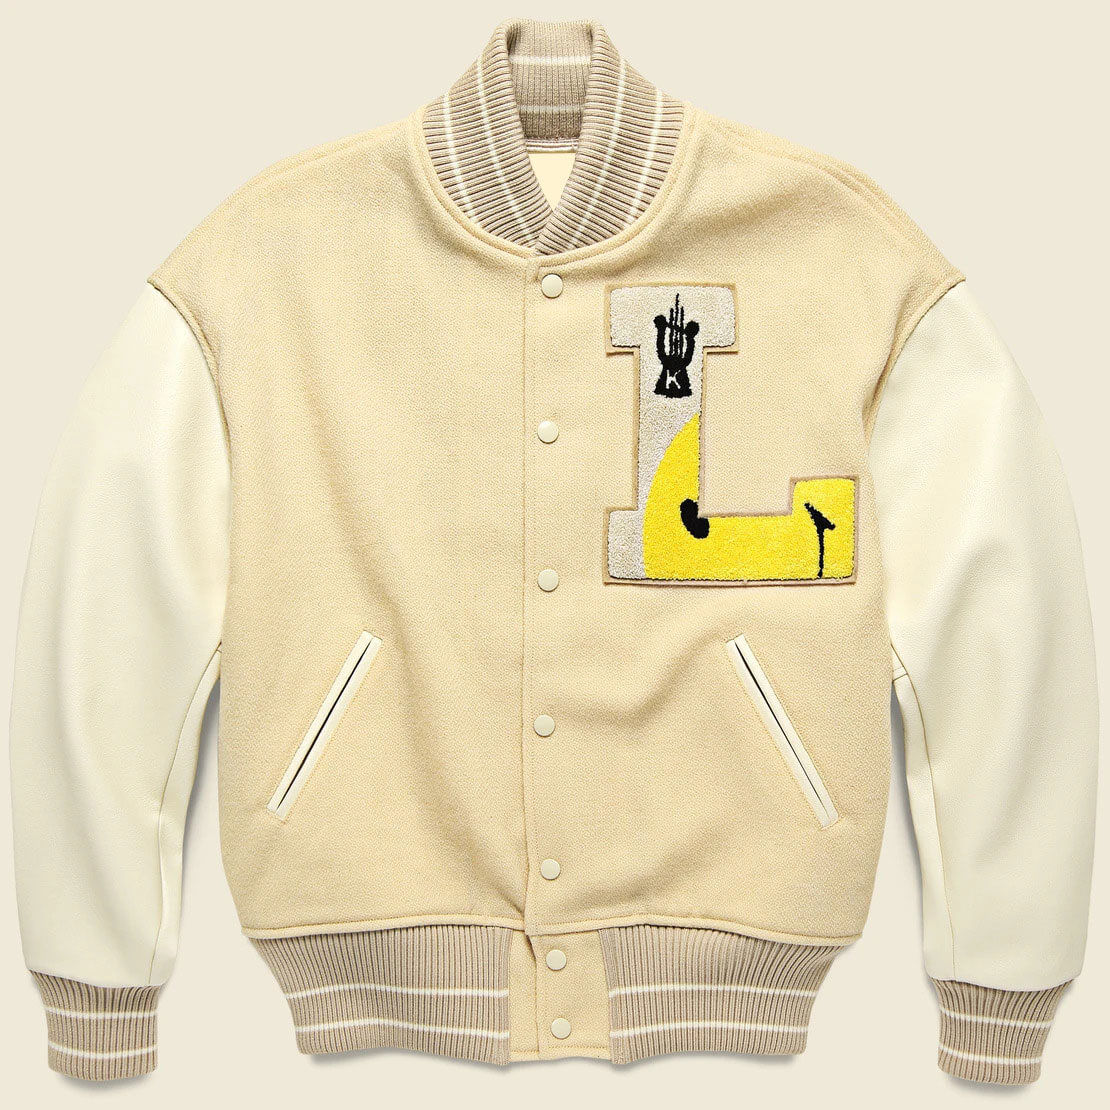 Personalised Red Varsity Jacket With Yellow Letter and White 